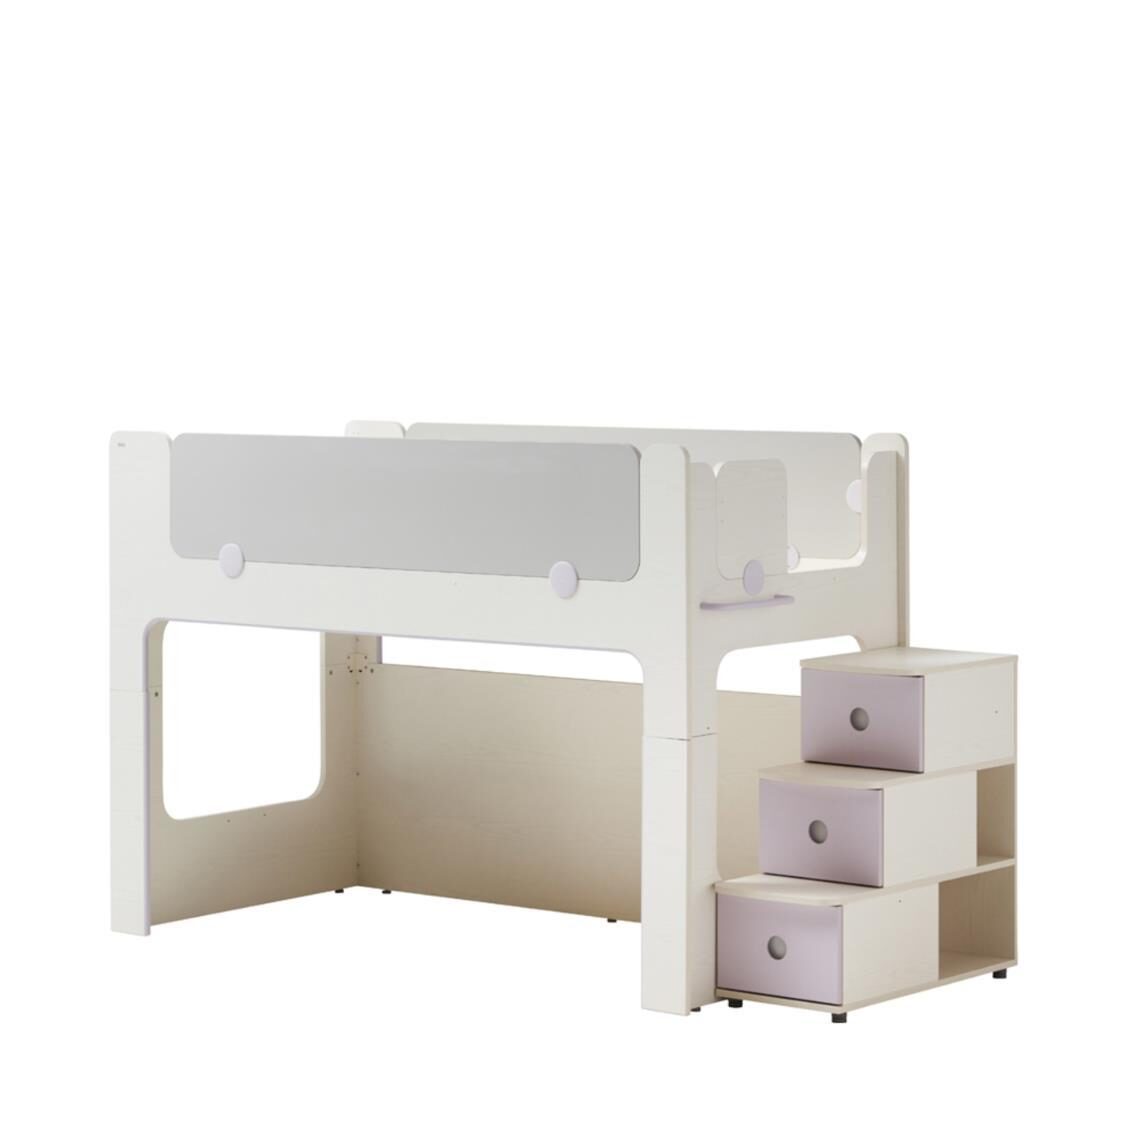 Iloom Cabin Bunk Bed Stairs Cabinet FIVLU Finland Ivory Light Purple